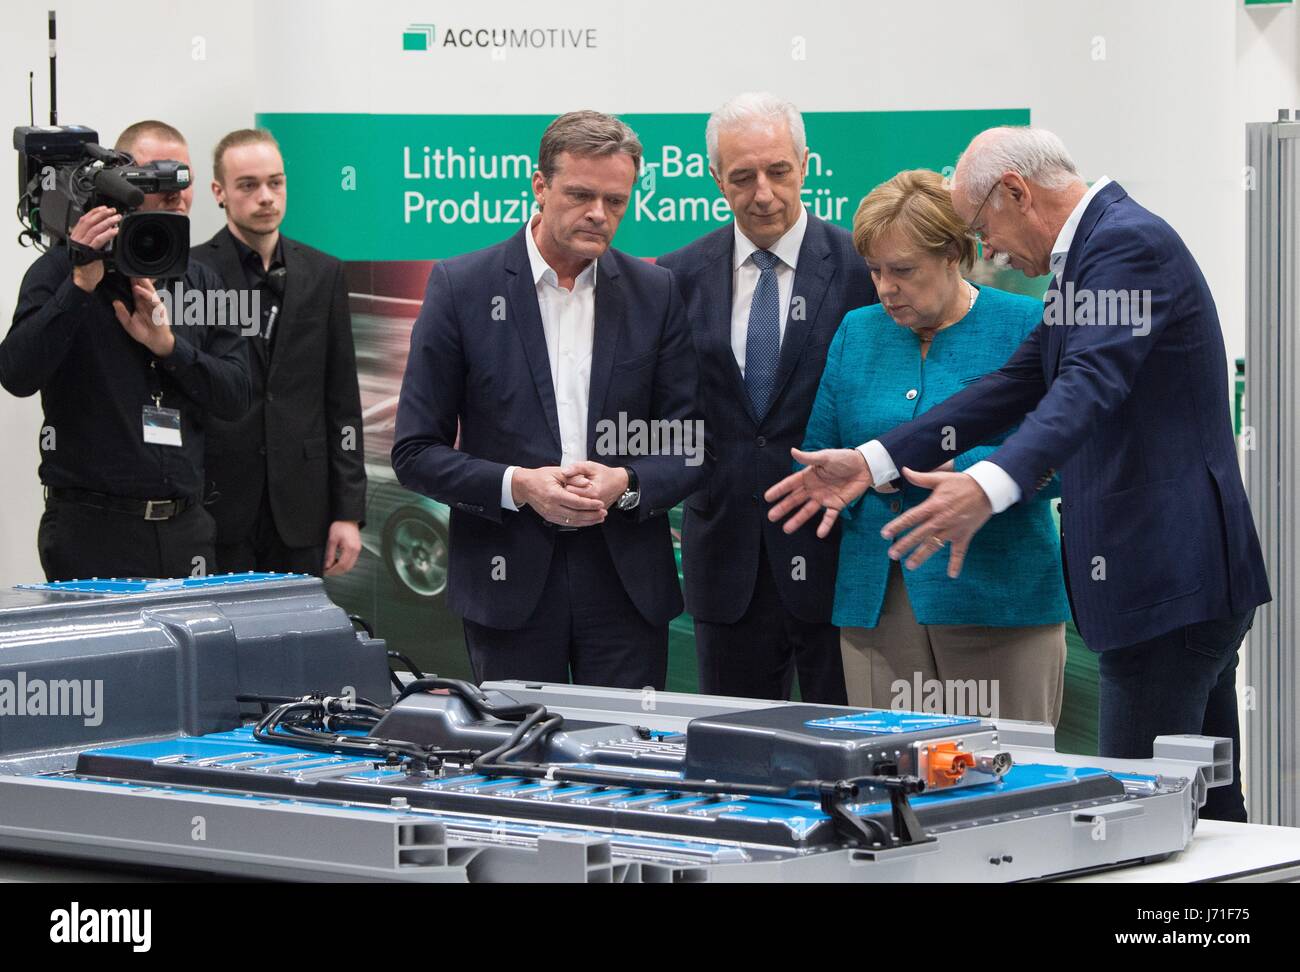 Kamenz, Germany. 22nd May, 2017. Markus Schaefer (L-R), a member of the board of directors of Mercedes-Benz Cars, the premier of the state of Saxony Stanislaw Tillich (CDU), German chancellor Angela Merkel (CDU), and the CEO of Damiler Dieter Zetsche during a tour of the Daimler subsidiary's workshop in Kamenz, Germany, 22 May 2017. The foundation stone for a new Accumotive battery factory was laid on the same day. Credit: dpa picture alliance/Alamy Live News Stock Photo